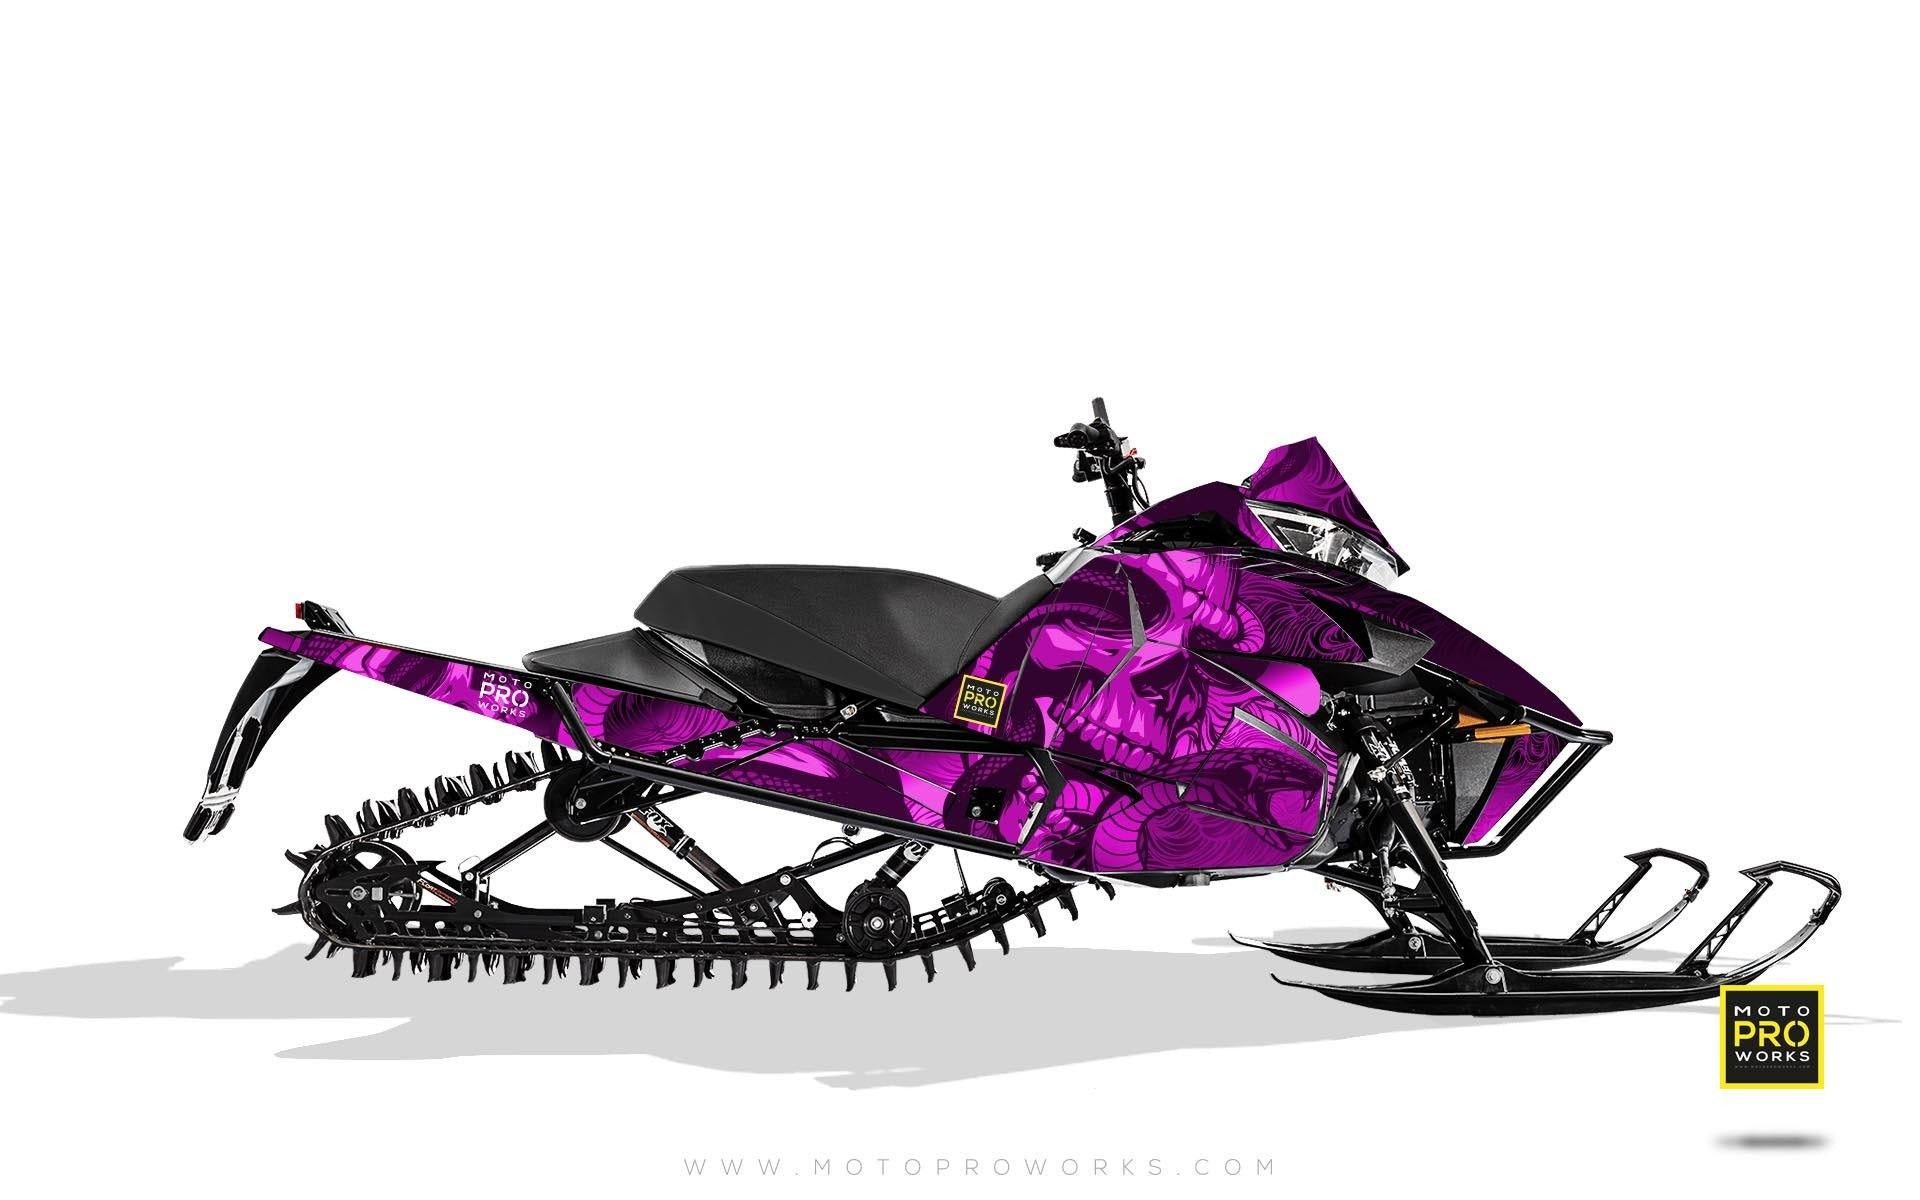 Arctic Cat Graphics - "Ssskully" (pink) - MotoProWorks | Decals and Bike Graphic kit